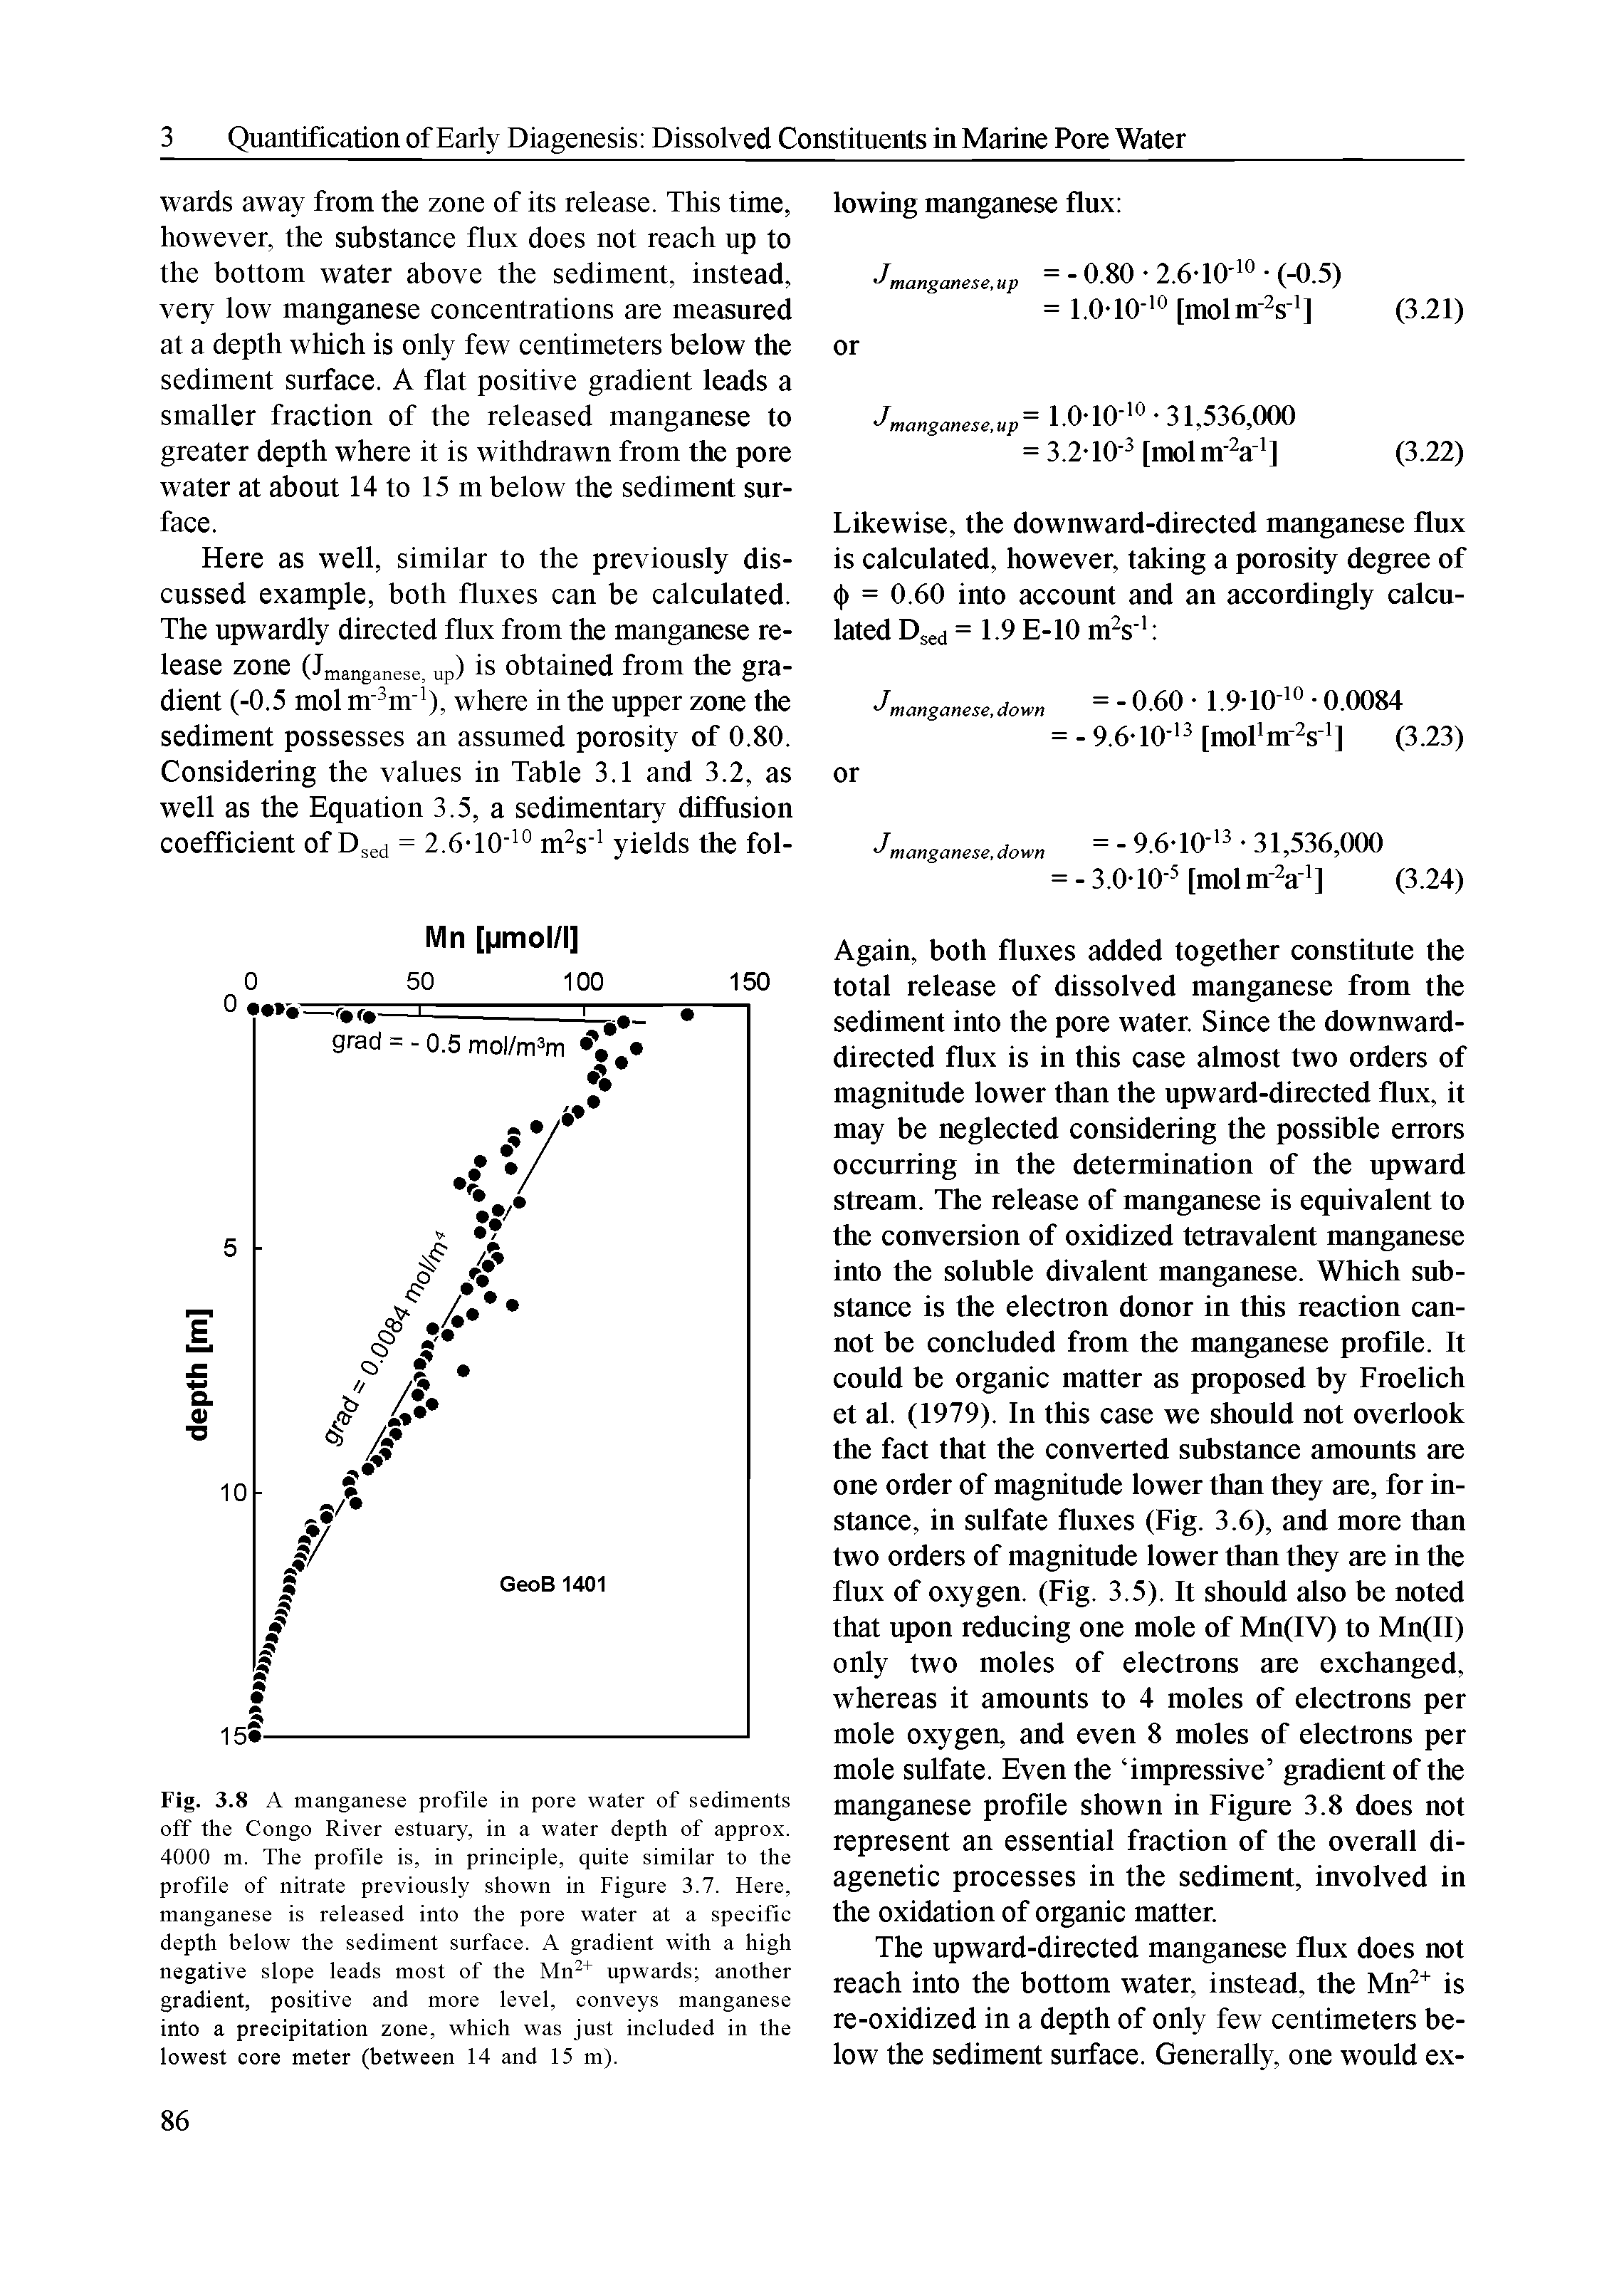 Fig. 3.8 A manganese profile in pore water of sediments off the Congo River estuary, in a water depth of approx. 4000 m. The profile is, in principle, quite similar to the profile of nitrate previously shown in Figure 3.7. Here, manganese is released into the pore water at a specific depth below the sediment surface. A gradient with a high negative slope leads most of the Mn upwards another gradient, positive and more level, conveys manganese into a precipitation zone, which was just included in the lowest core meter (between 14 and 15 m).